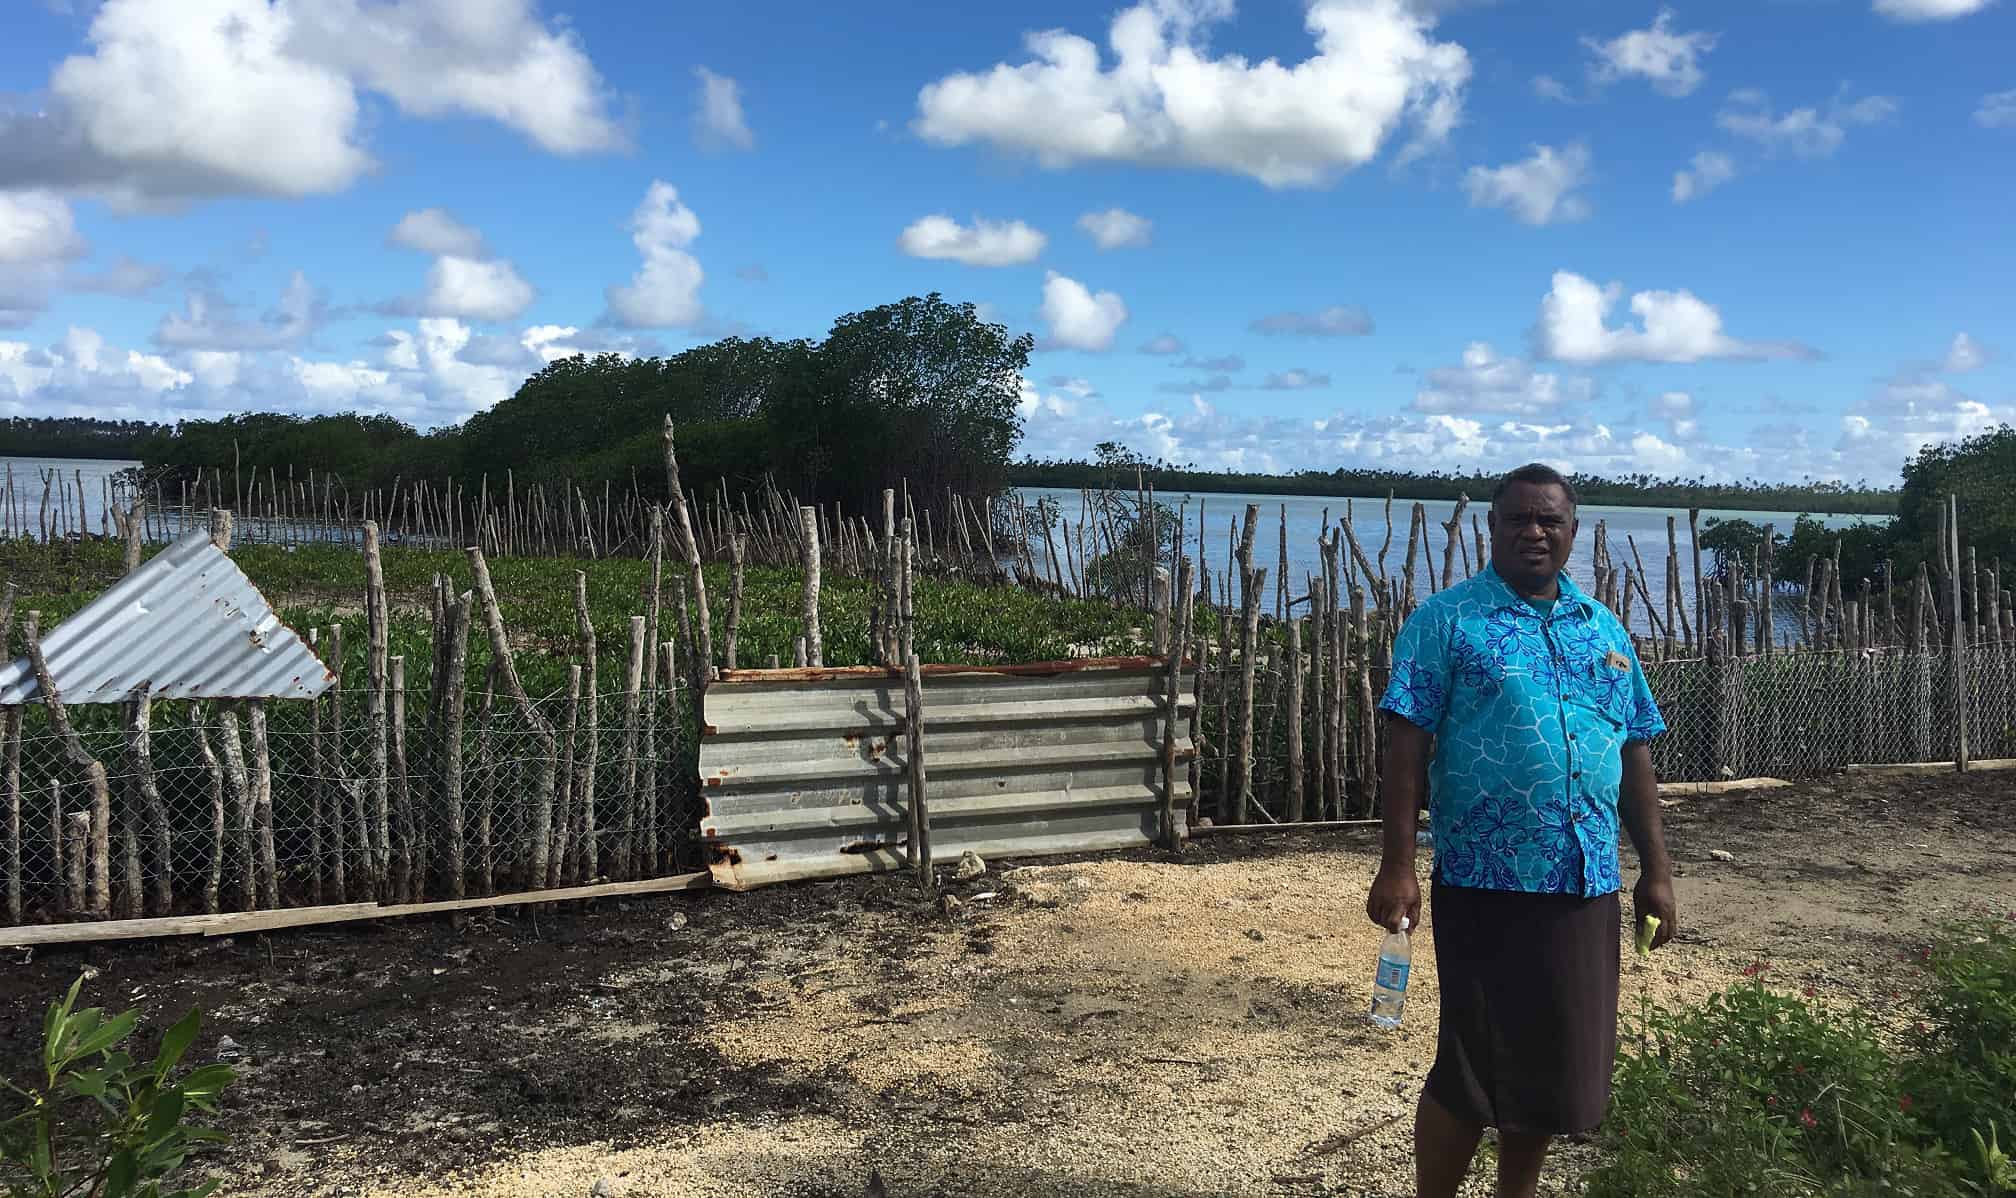 A man stands in front of mangroves trees.